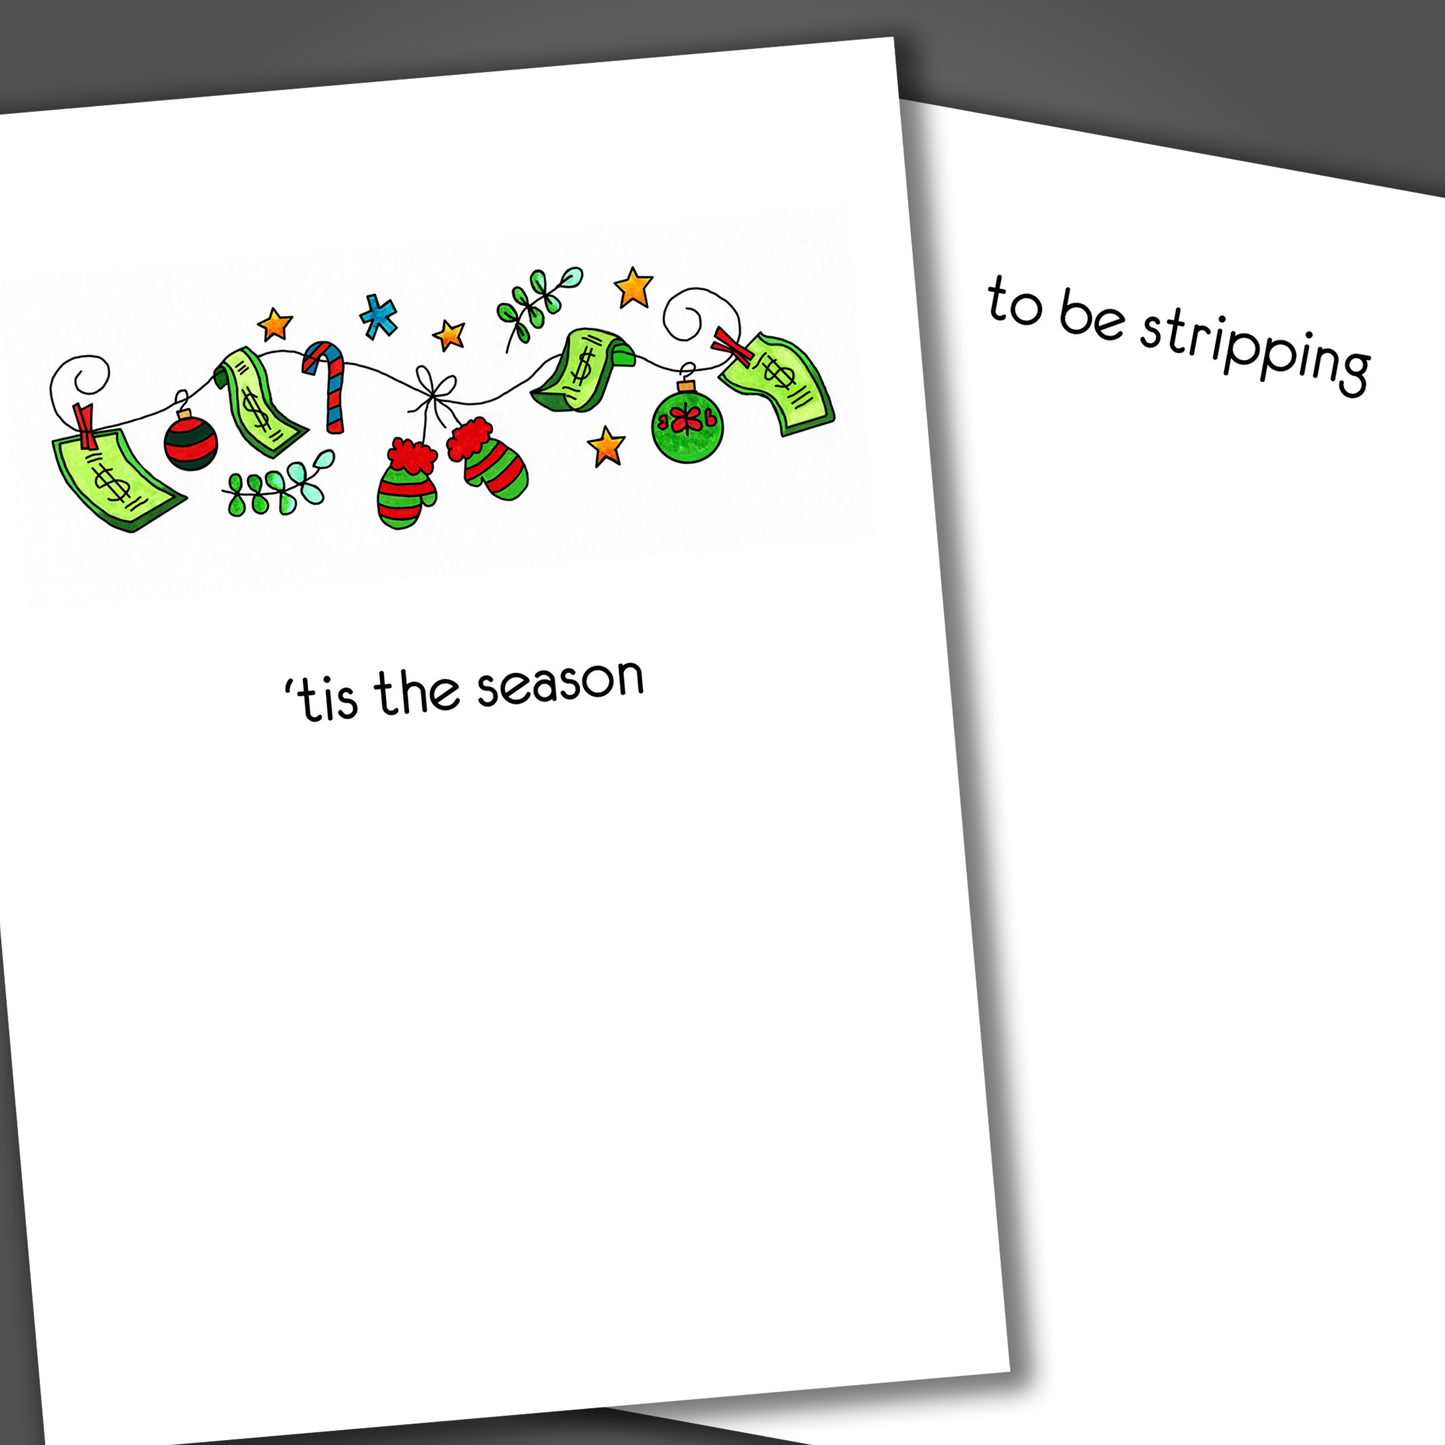 Funny Christmas card with the phrase "tis the season" on the front. Inside the card is a joke that says "...to be stripping"